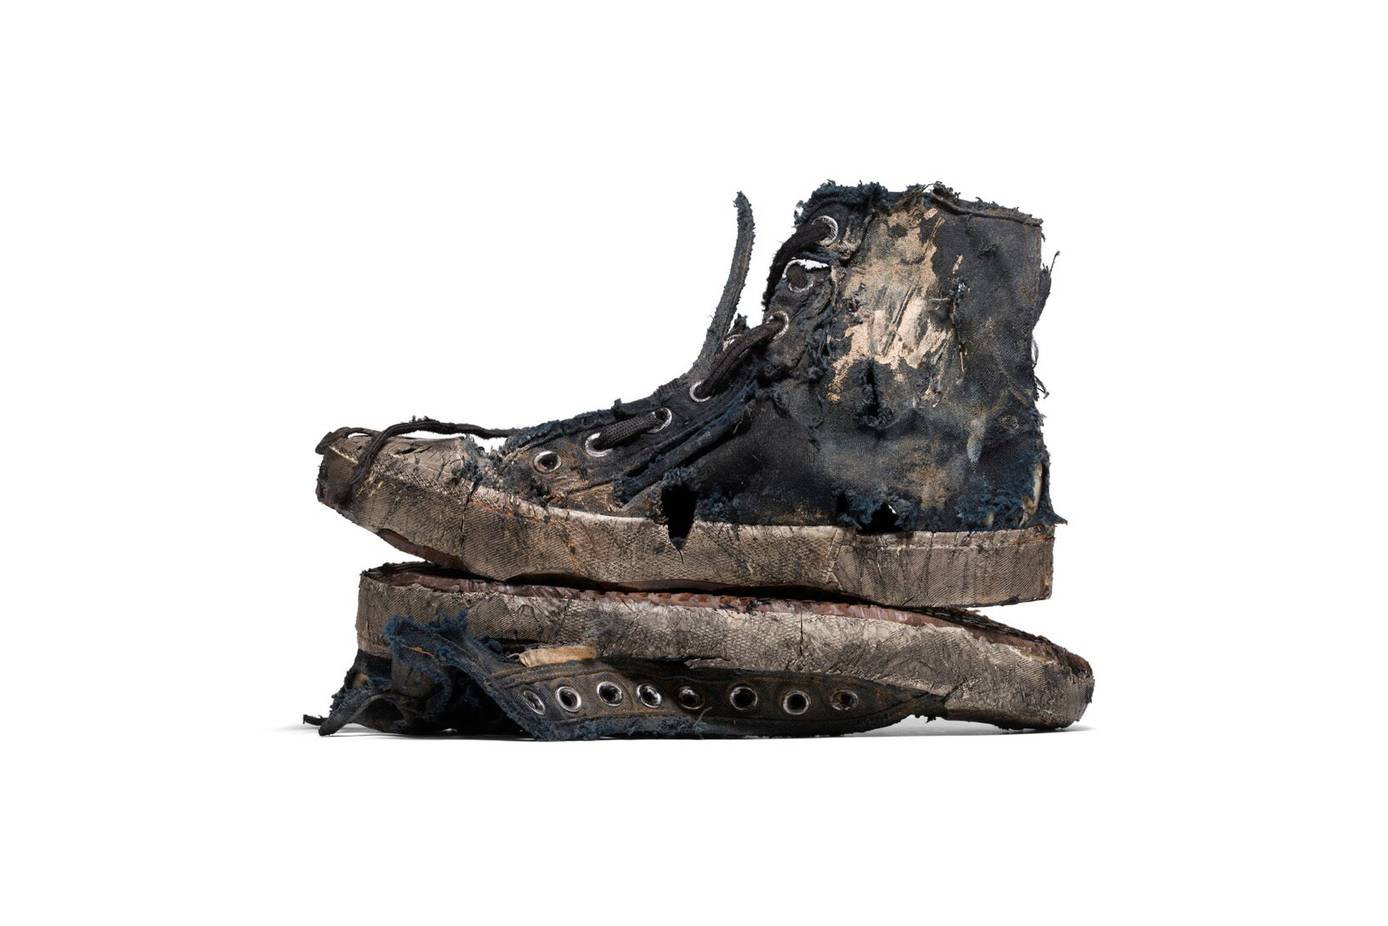 Hummingbird pedal indlysende High fashion or dubious taste? Balenciaga's destroyed sneaker causes  controversy